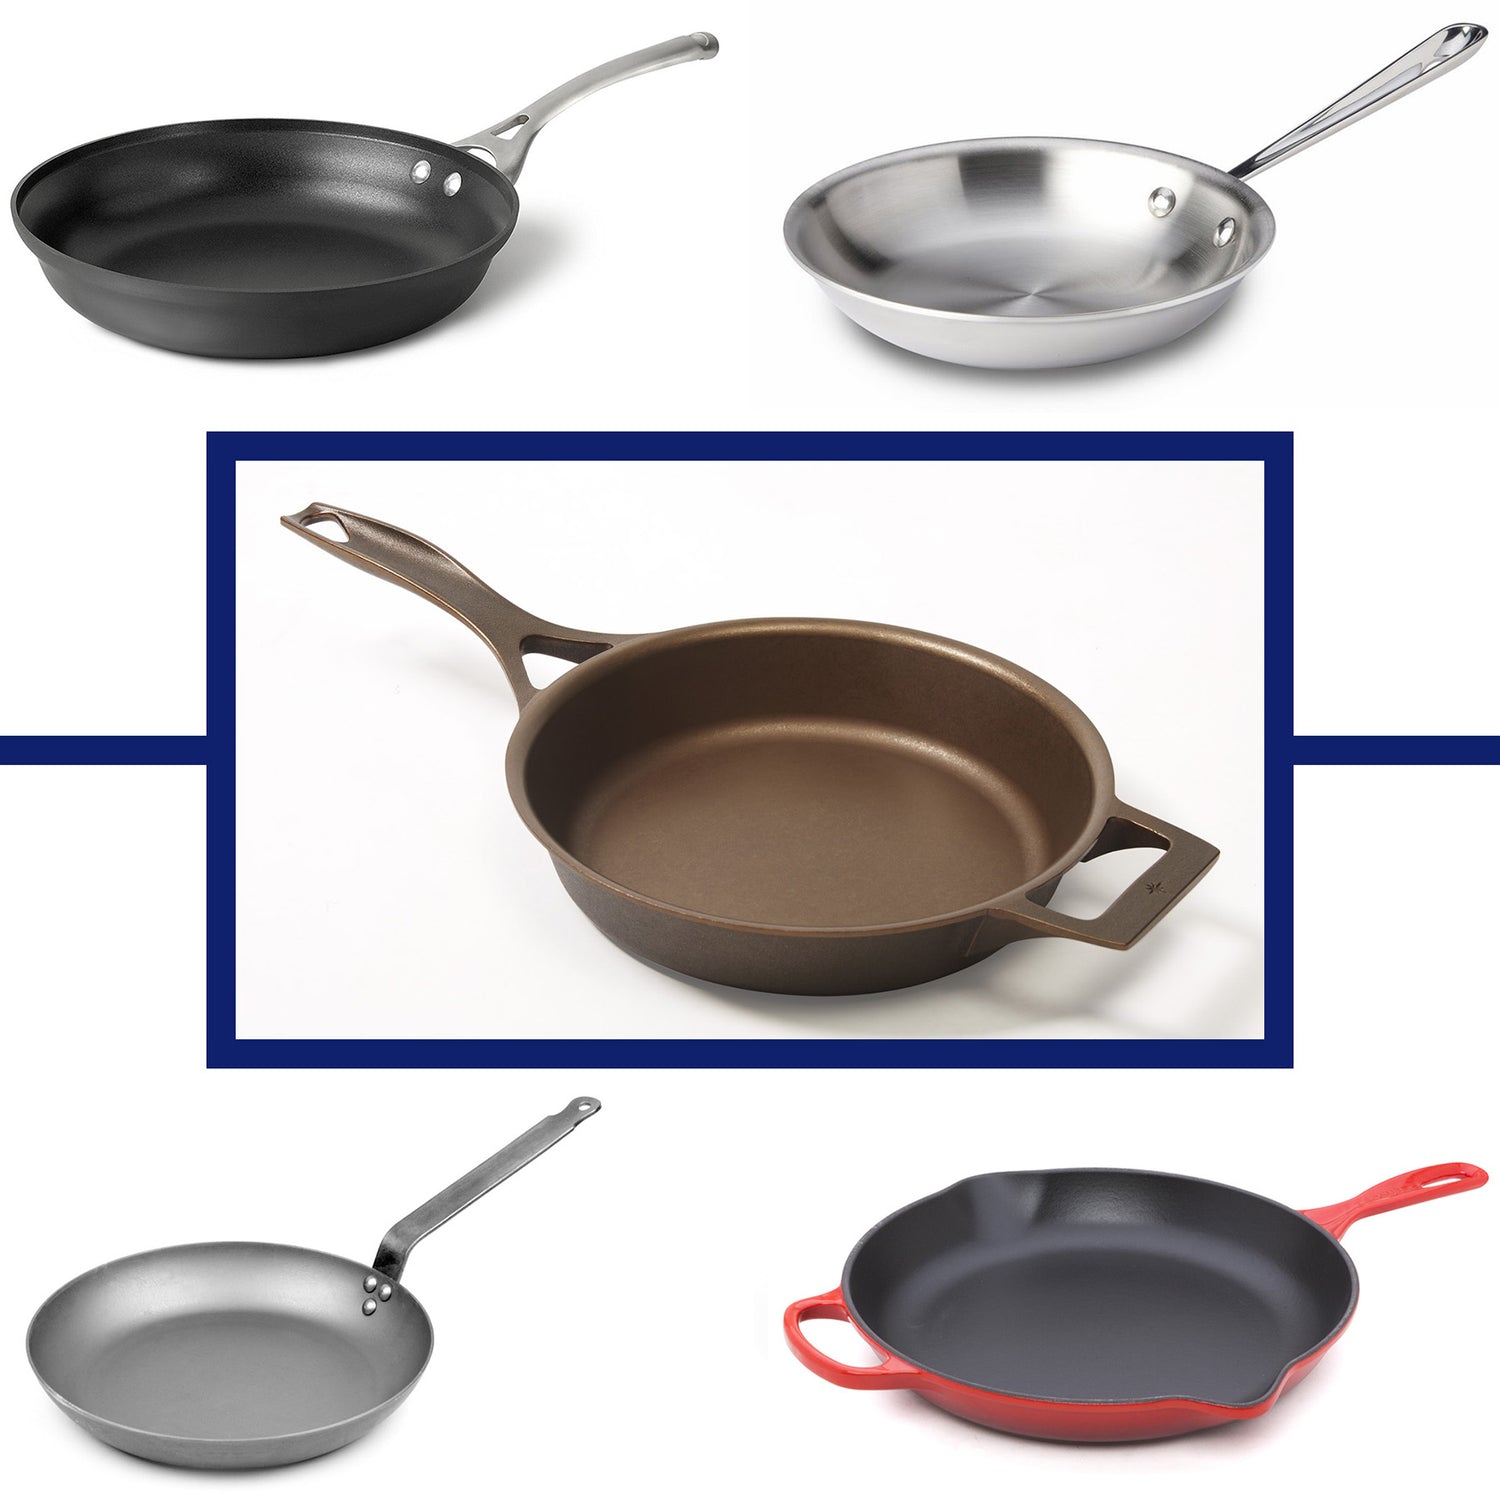 Carbon Steel- The Pro's All-Purpose, Nonstick Cookware of Choice